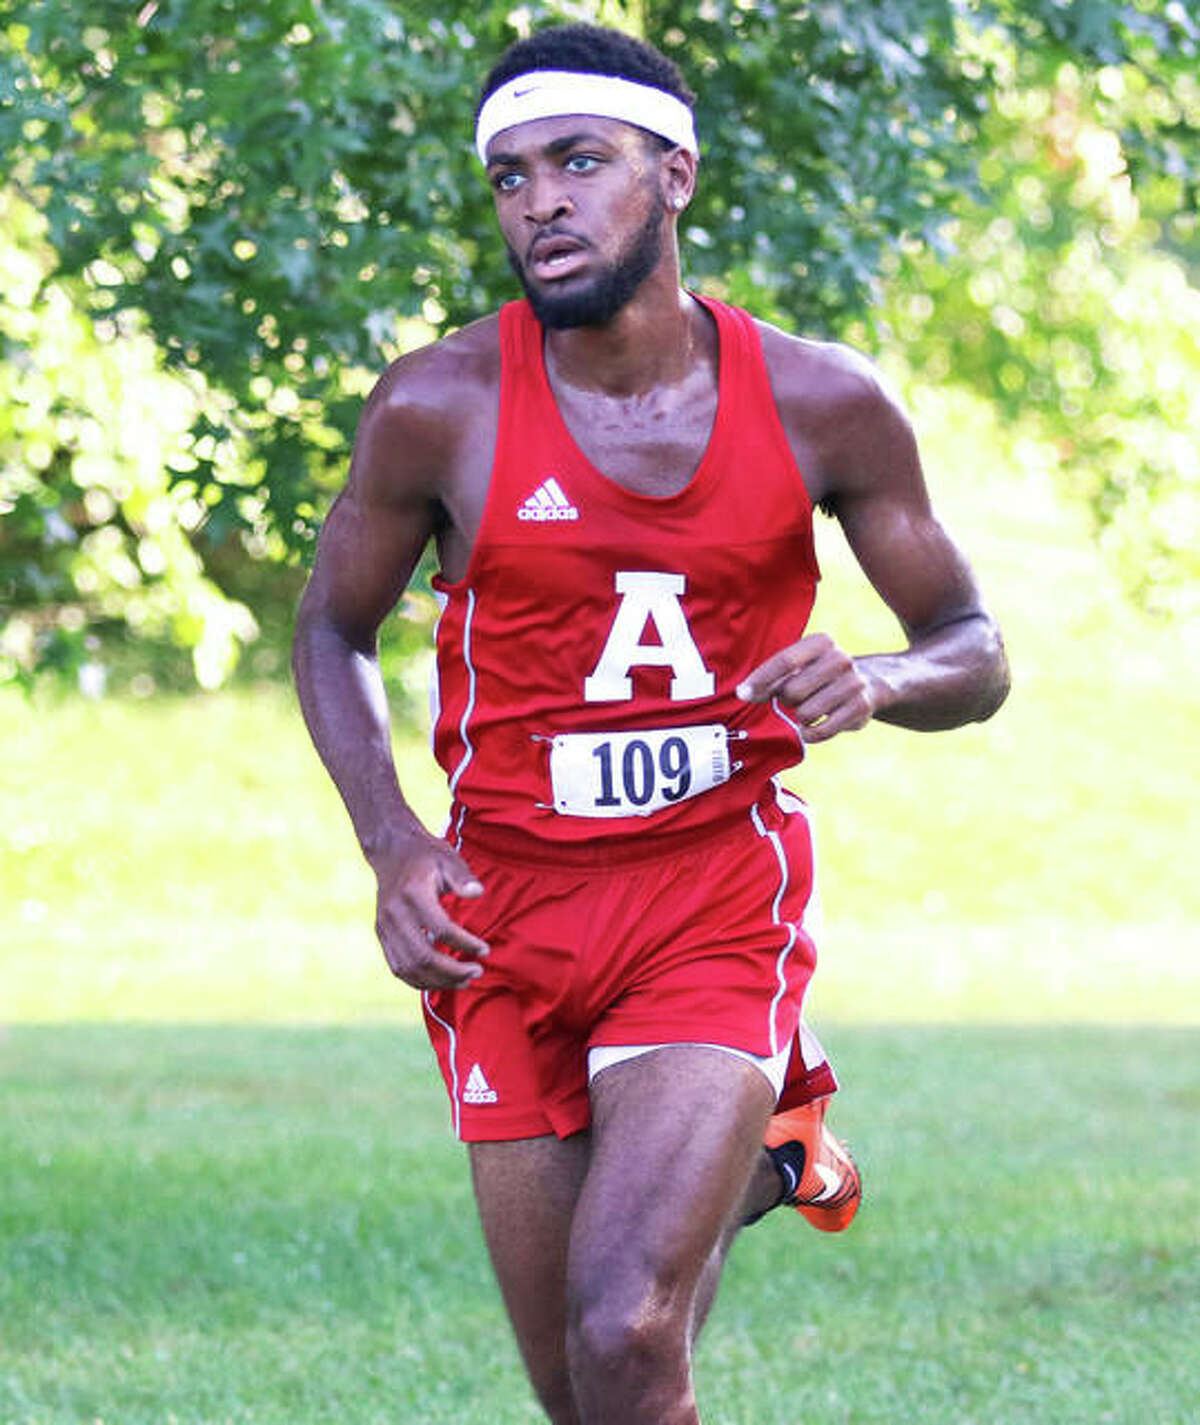 Alton senior Cassius Havis runs alone on the lead with about a half mile remaining in the Alton Invite on Wednesday at Moore Park.